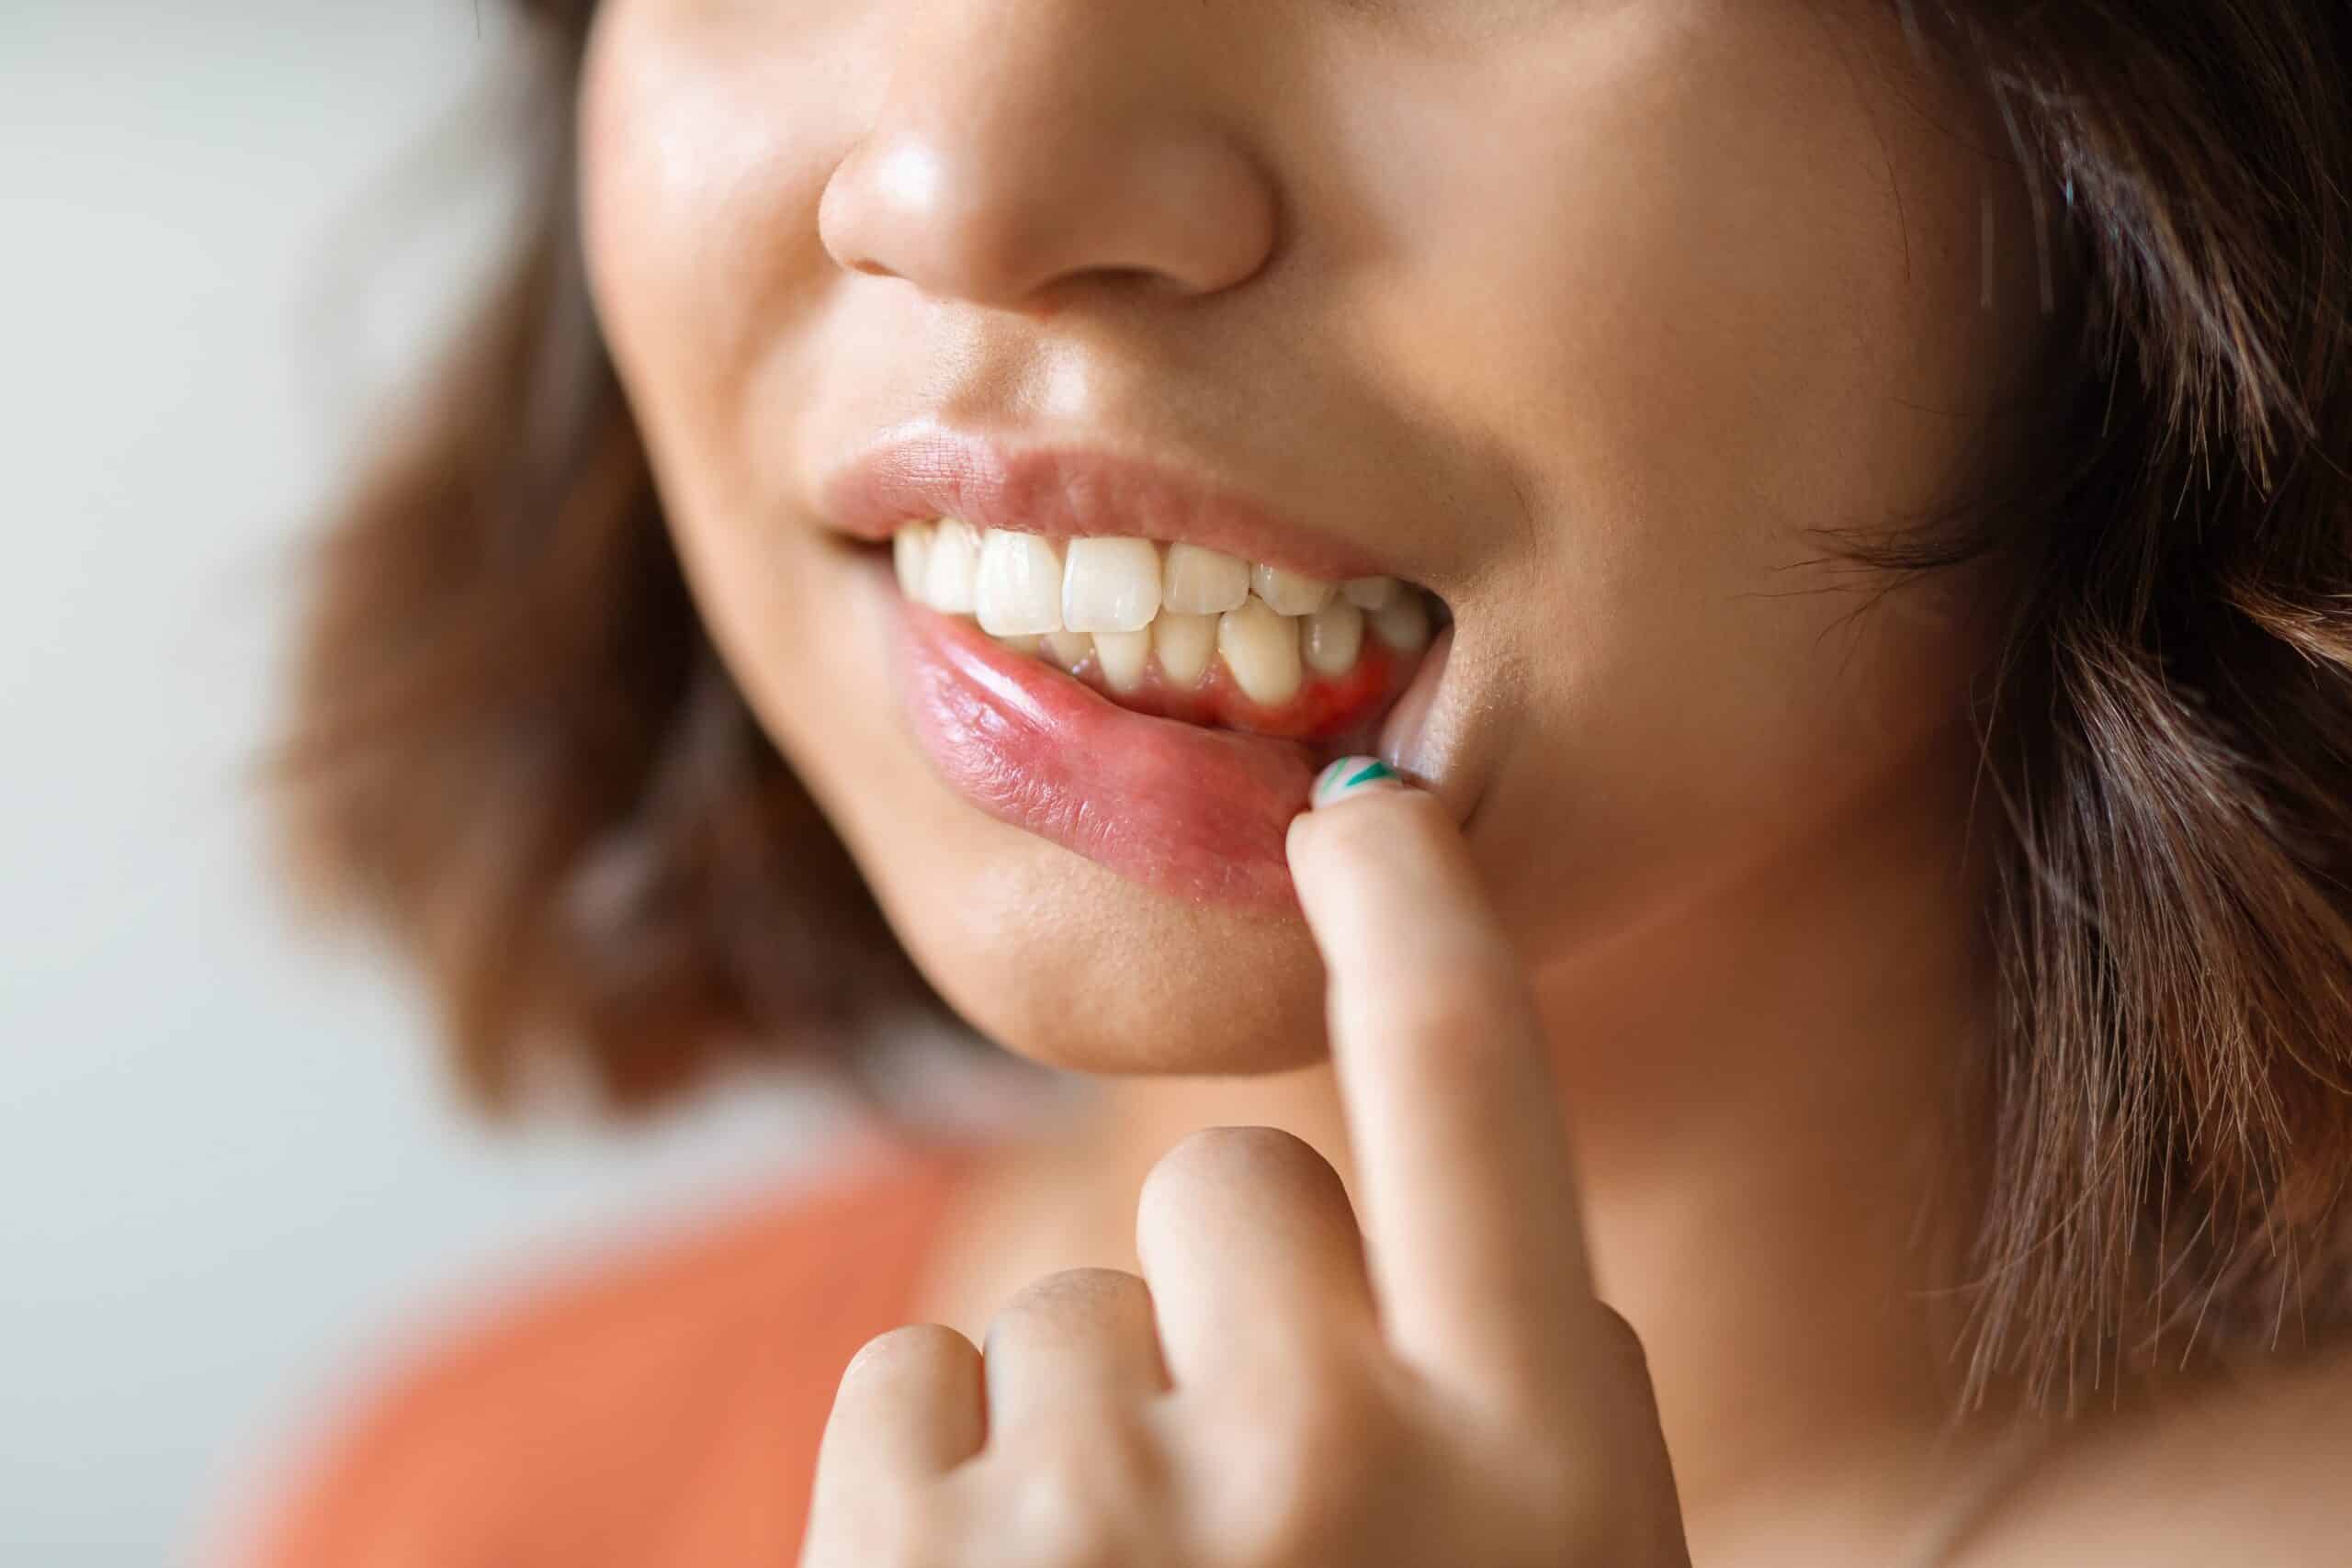  Young Woman Pulling Her Lip And Demonstrating Irritated Gums